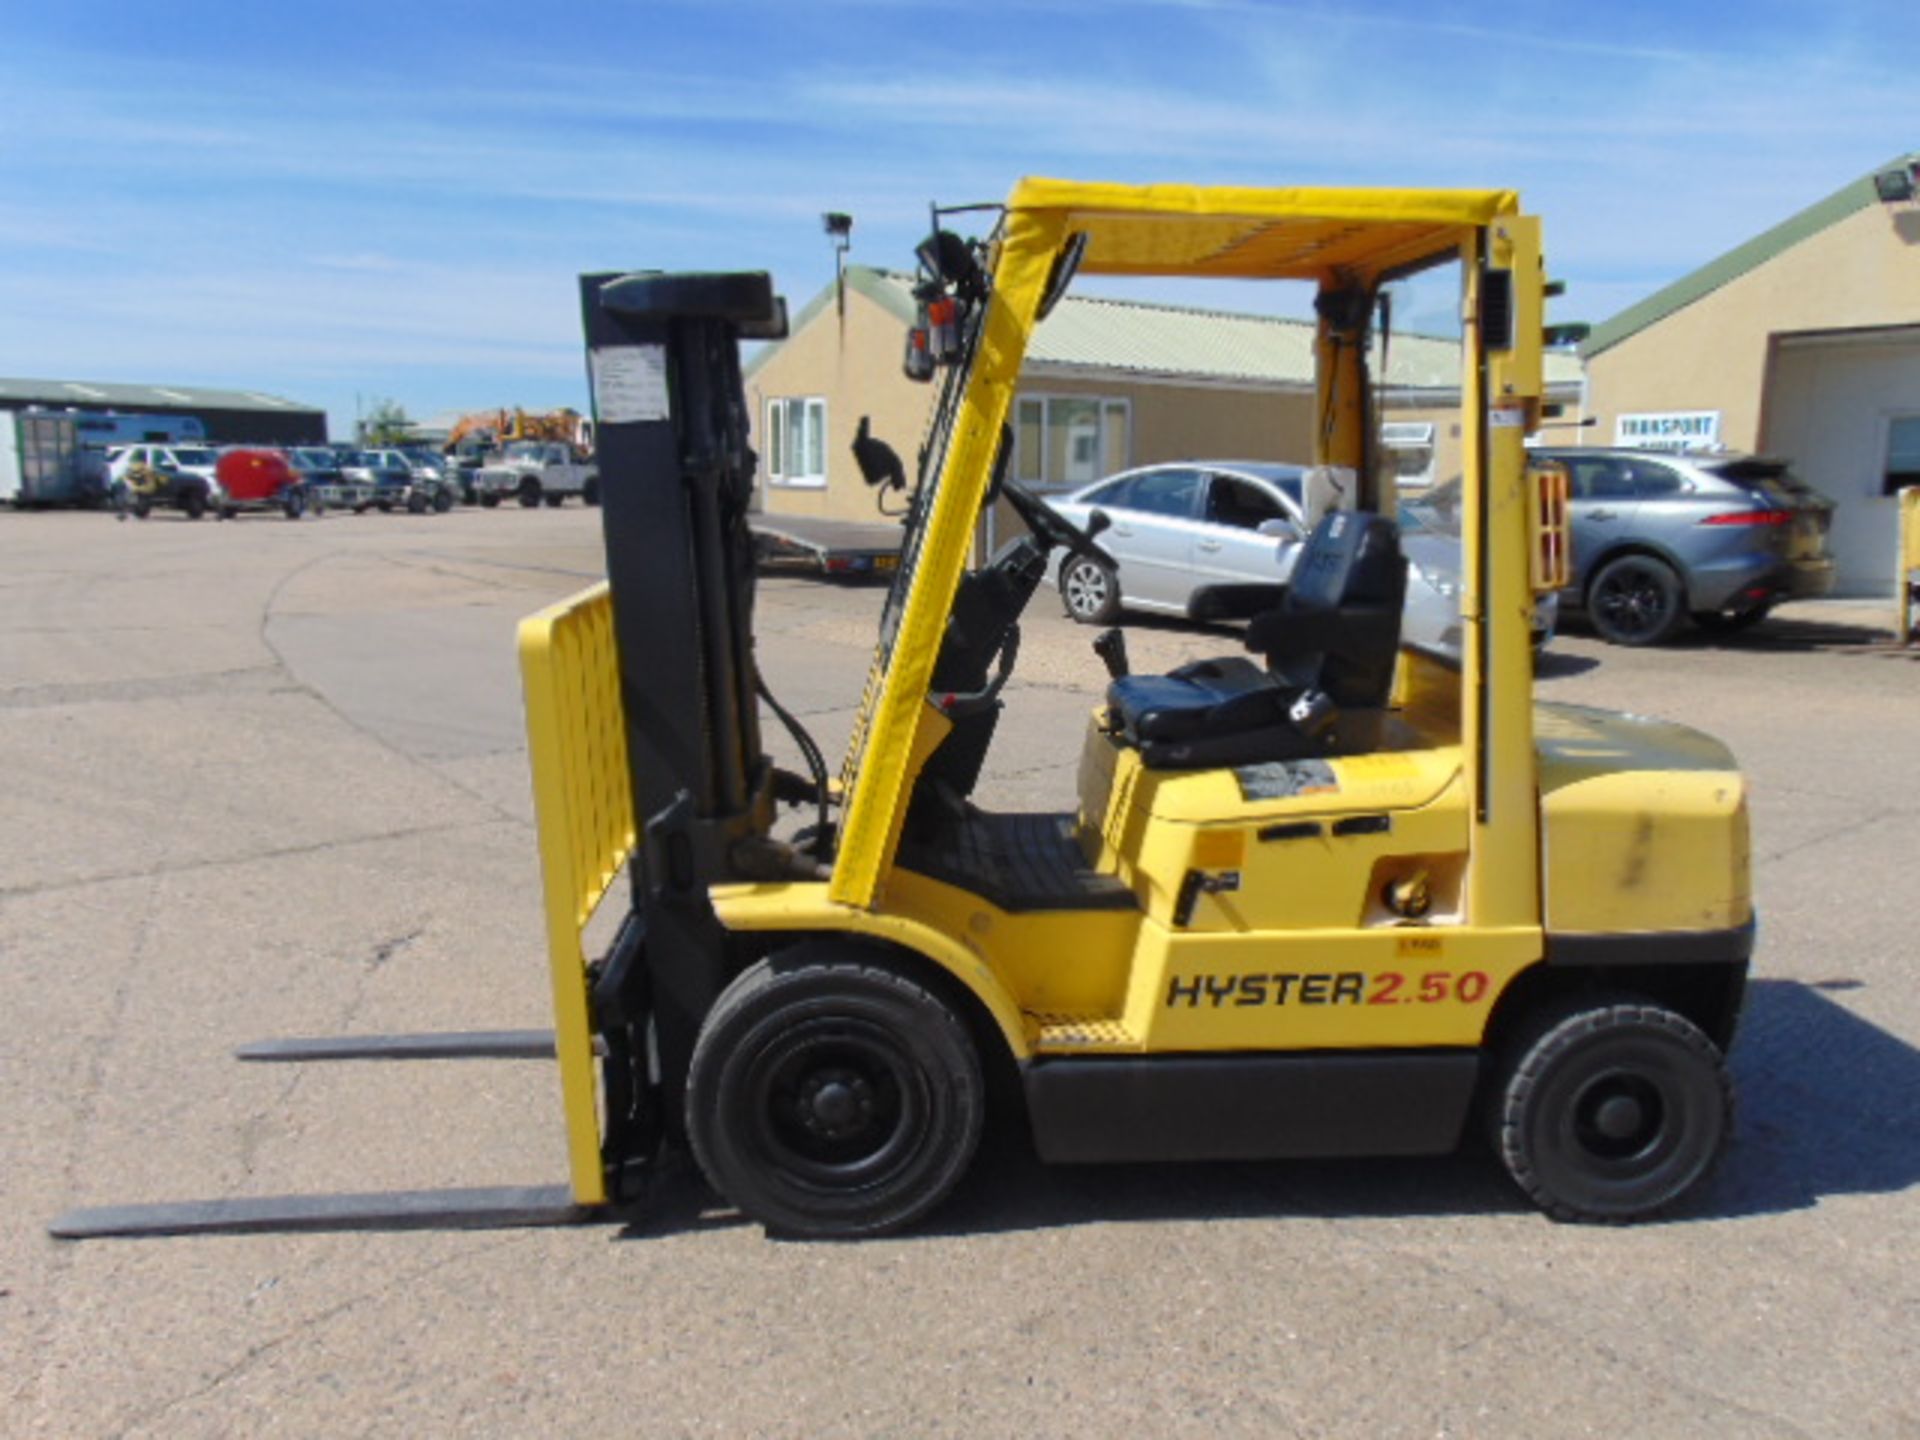 Hyster 2.50 Class C, Zone 2 Protected Diesel Forklift ONLY 763.4 hours!! - Image 5 of 29